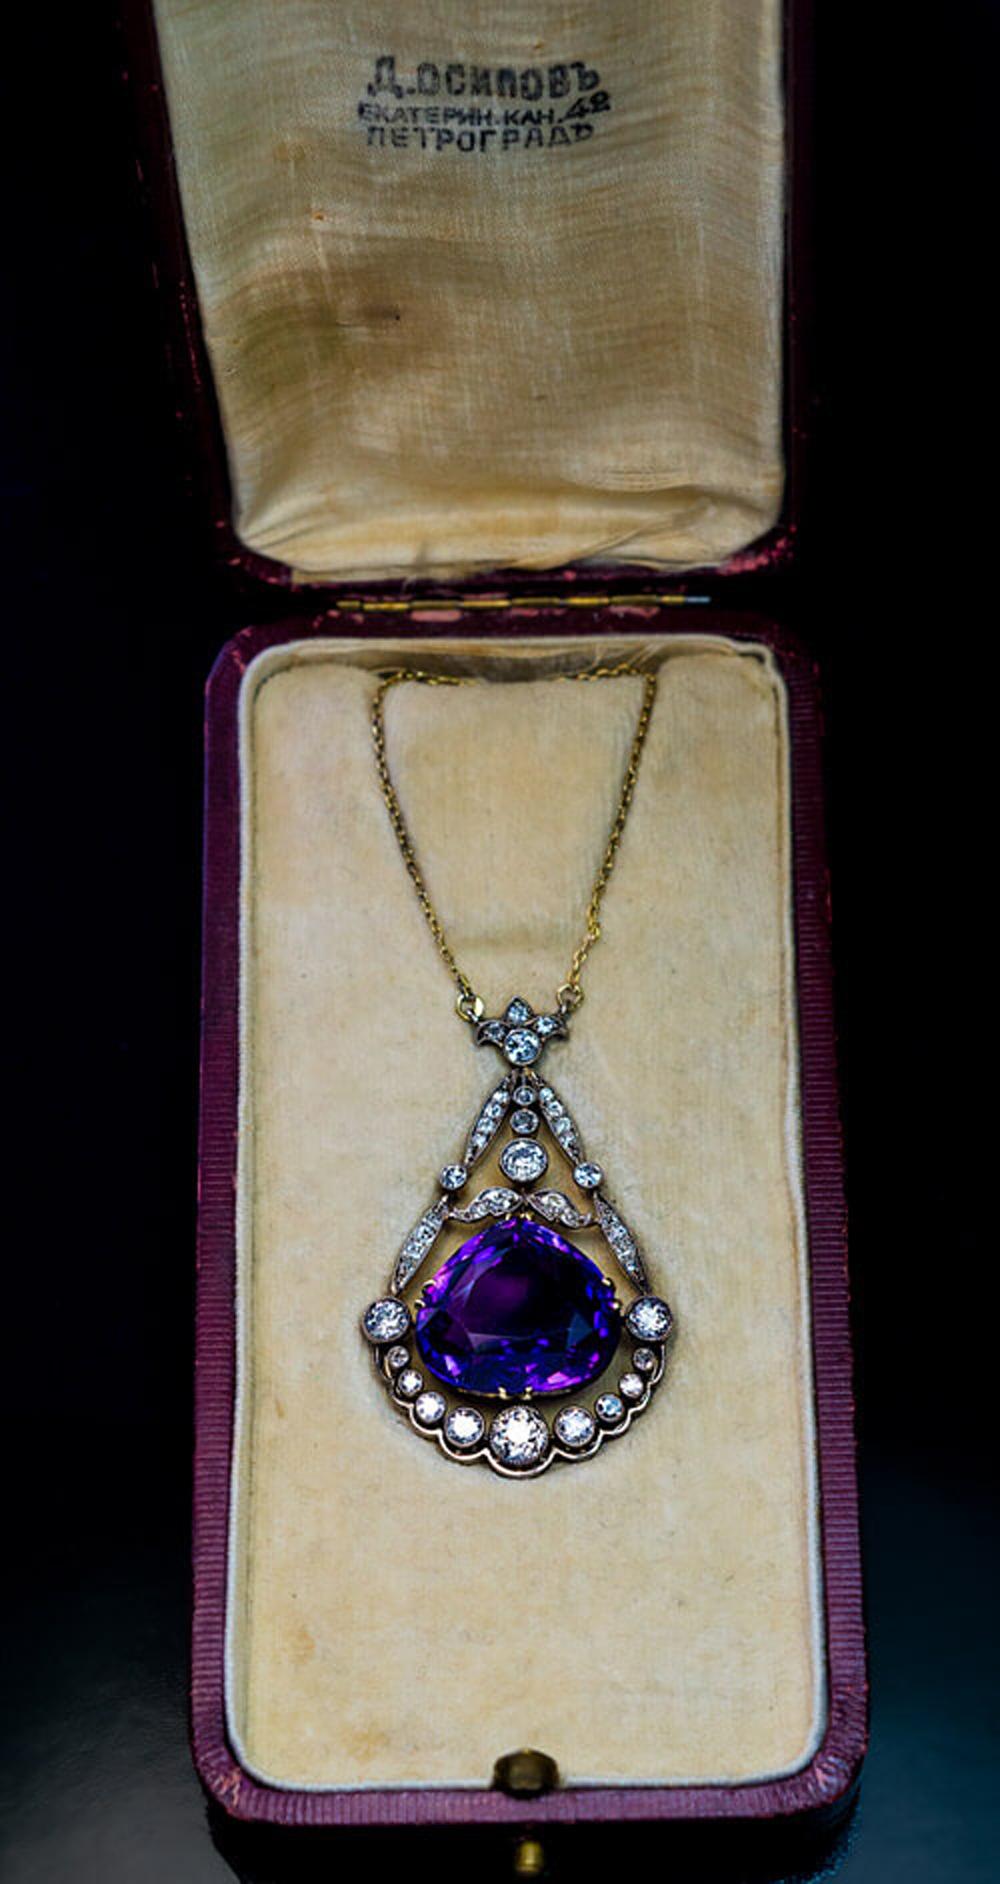 Saint Petersburg, Russia, circa 1915

The necklace is handcrafted in silver topped 14K gold (front – silver, back – gold). It features a pear shaped Siberian amethyst of a superb deep royal purple color. The amethyst is framed by bright white (G